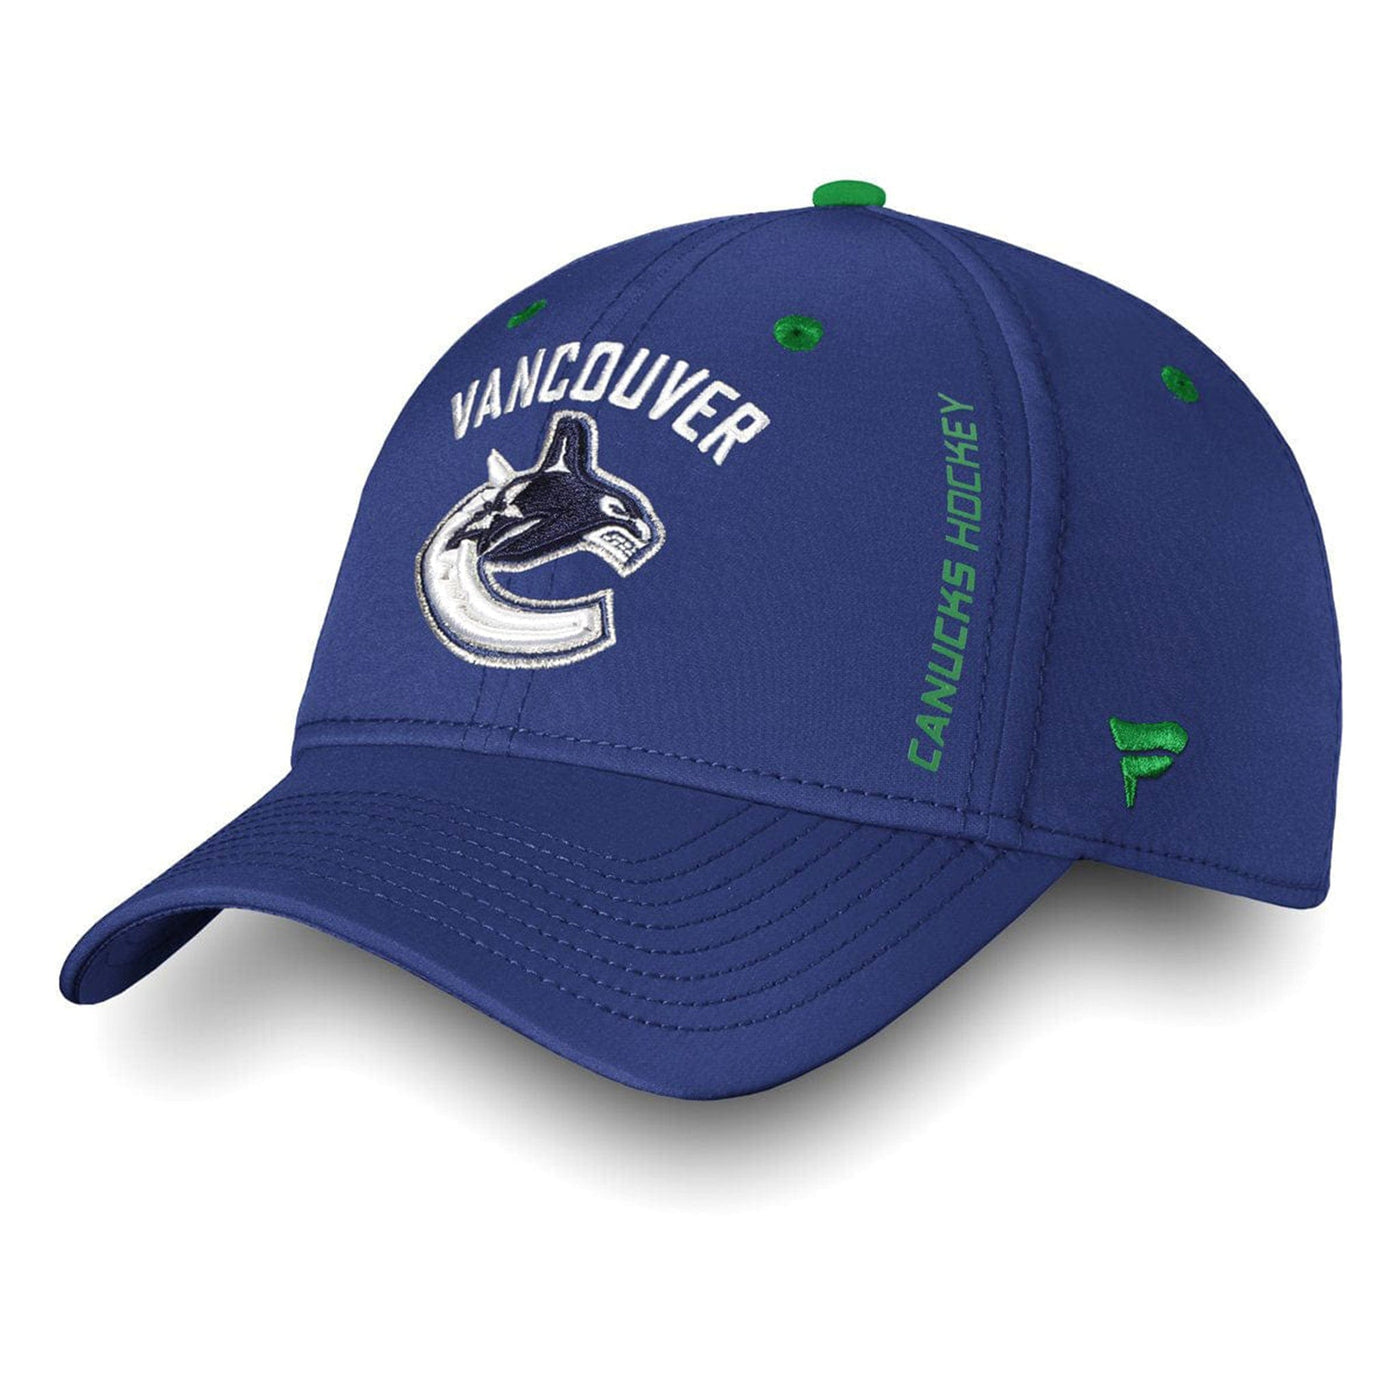 Vancouver Canucks Fanatics NHL Authentic Pro Rinkside Speed Flex Hat (2018) - The Hockey Shop Source For Sports